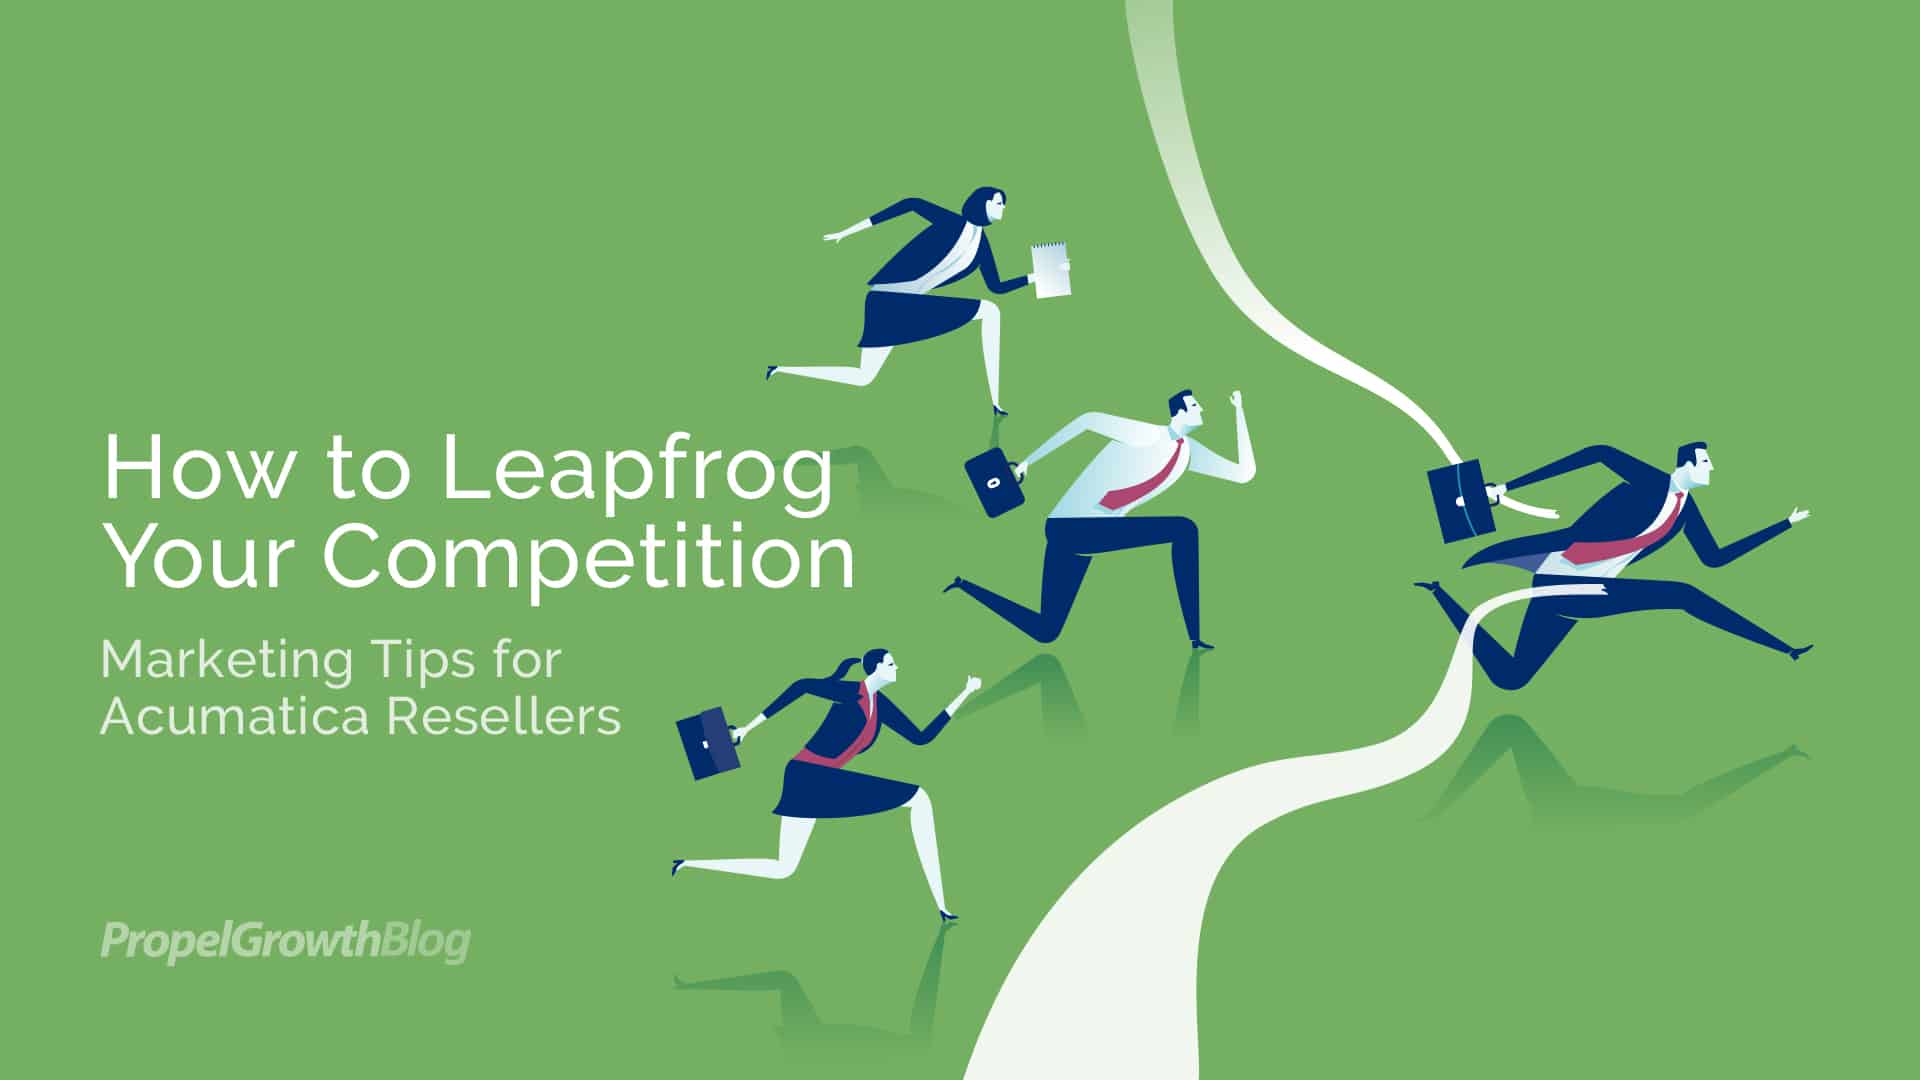 Acumatica VARs – Leapfrog Your Competition